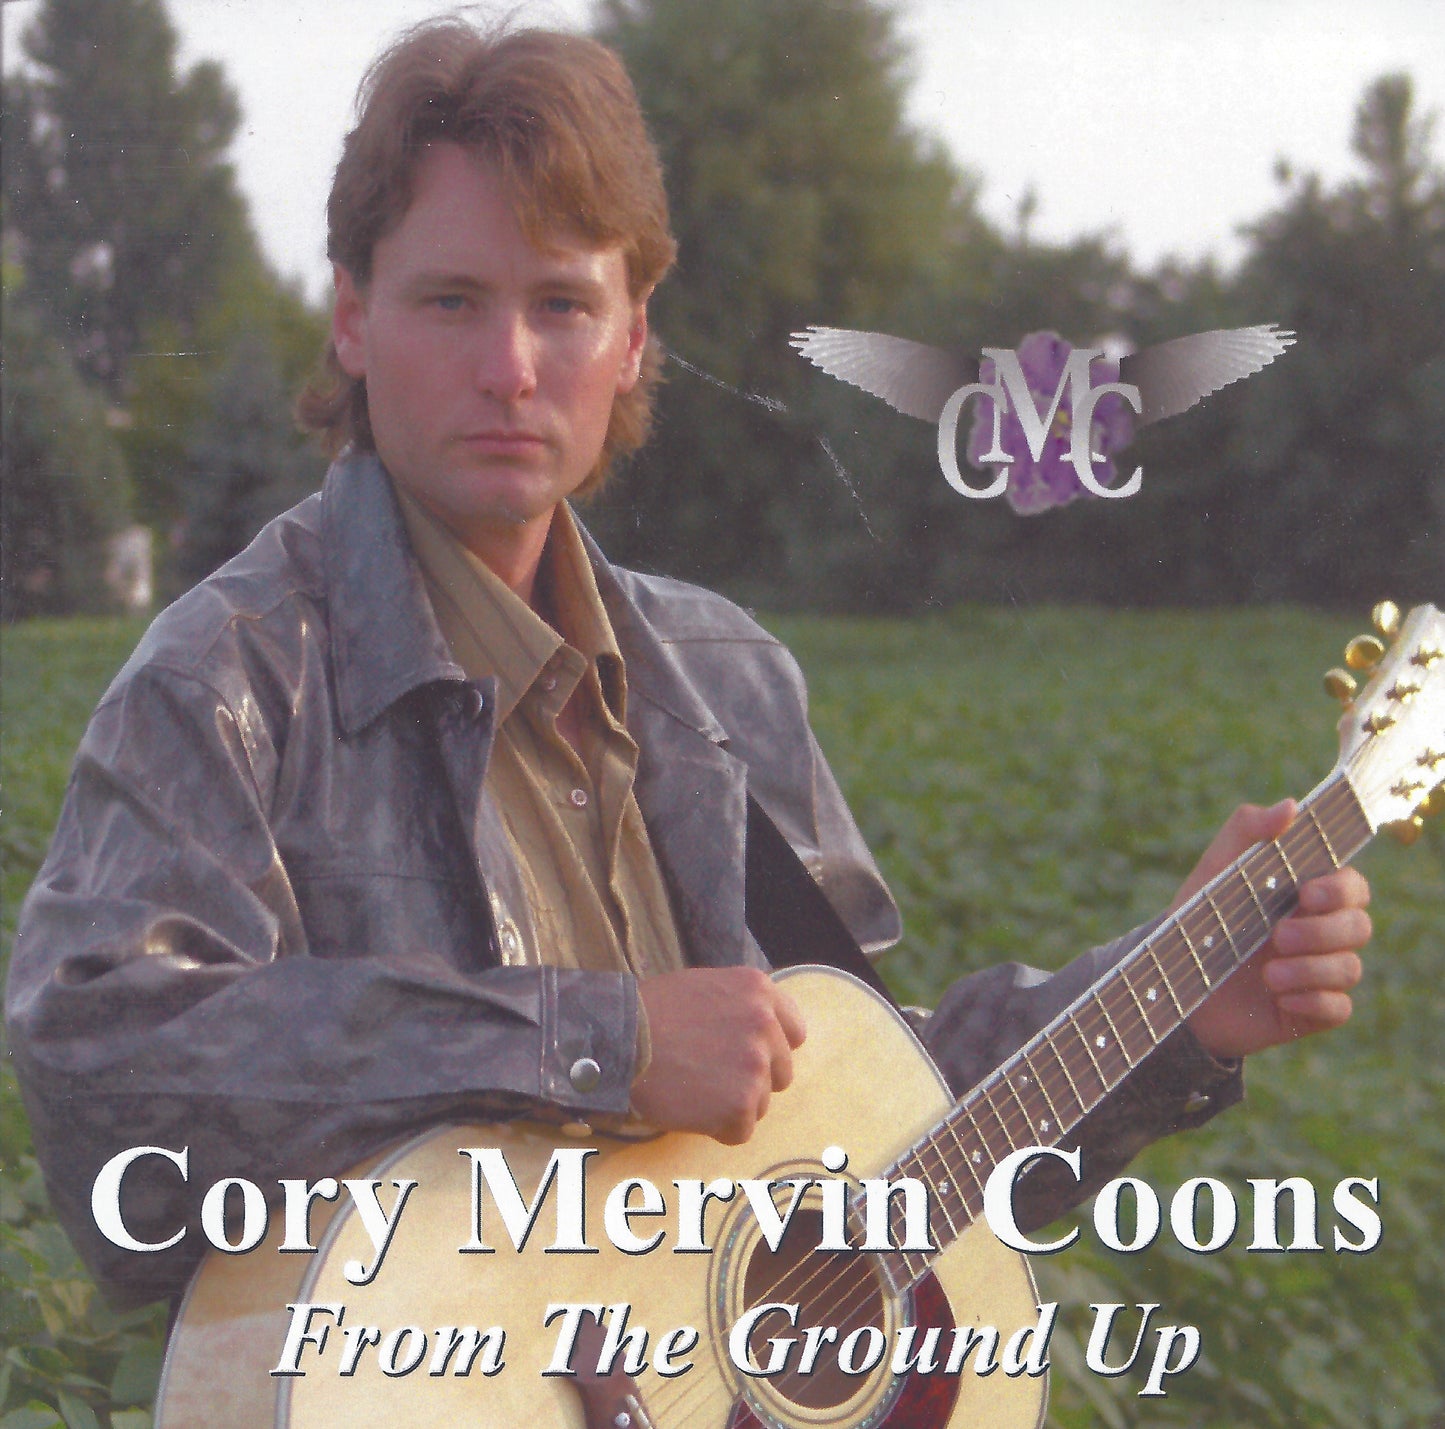 Unfold - Cory Mervin Coons